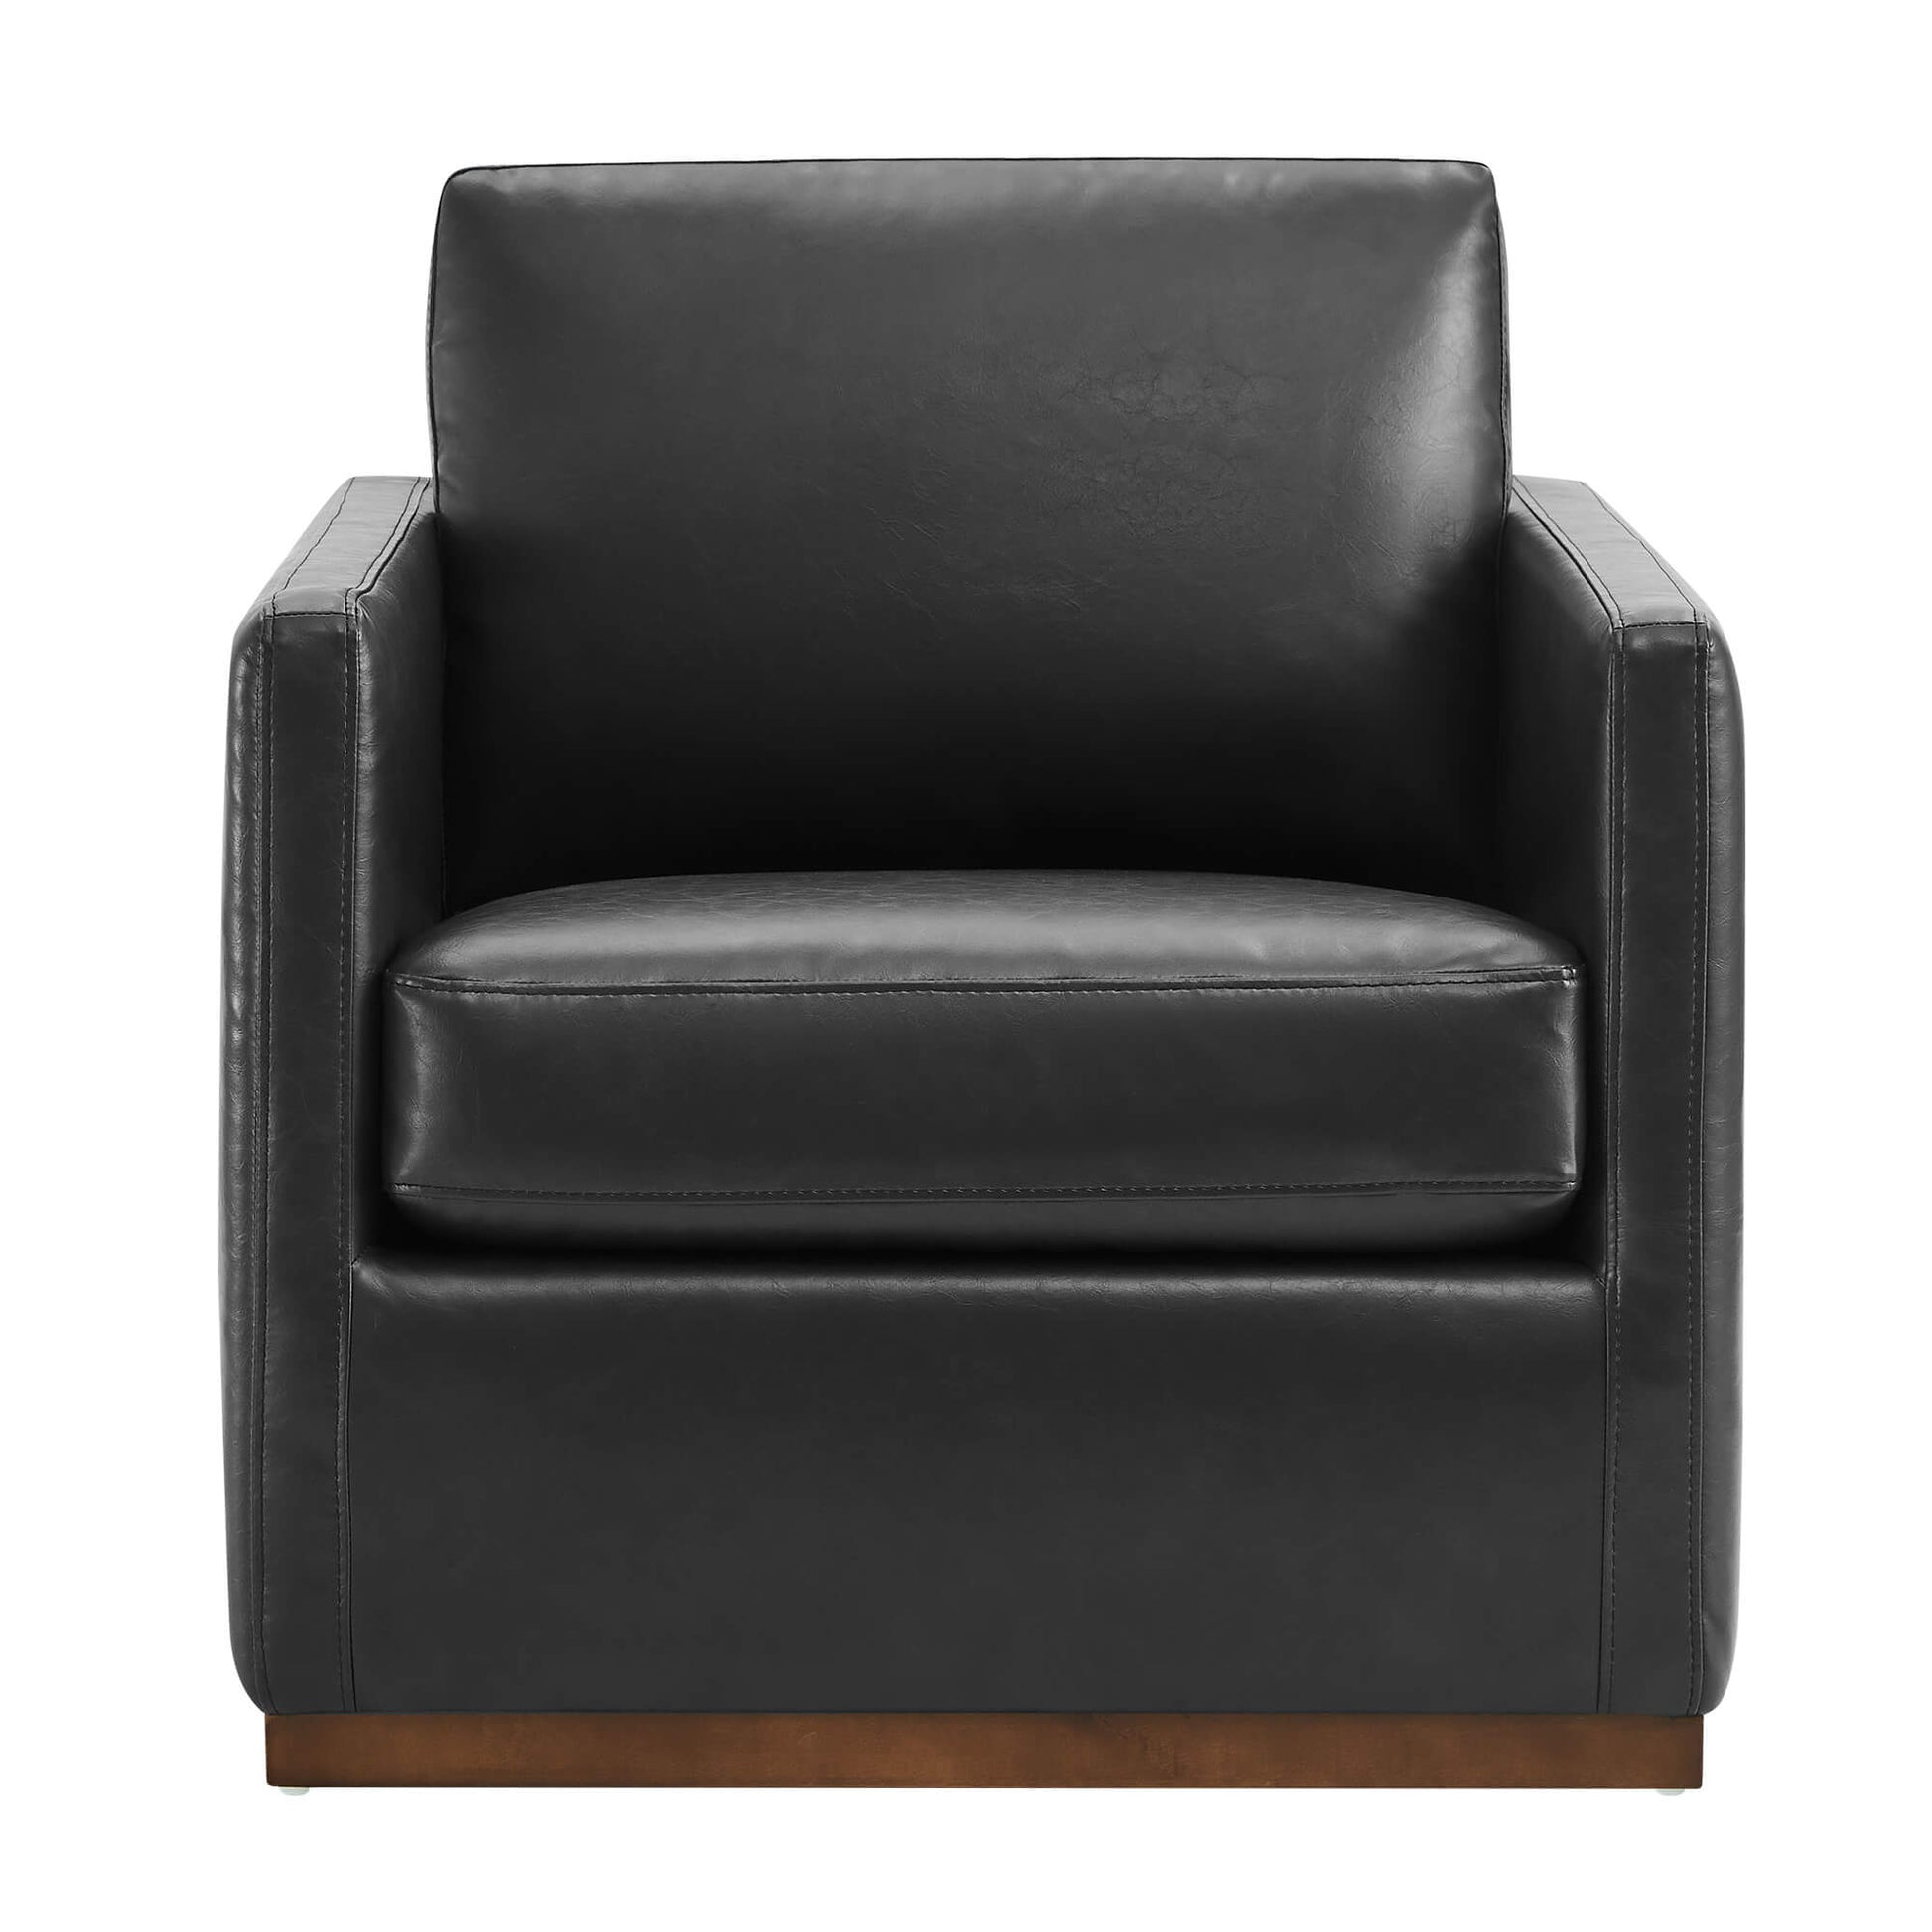 CHITA LIVING-Henry Swivel Accent Chair-Accent Chair-Faux Leather-Black-